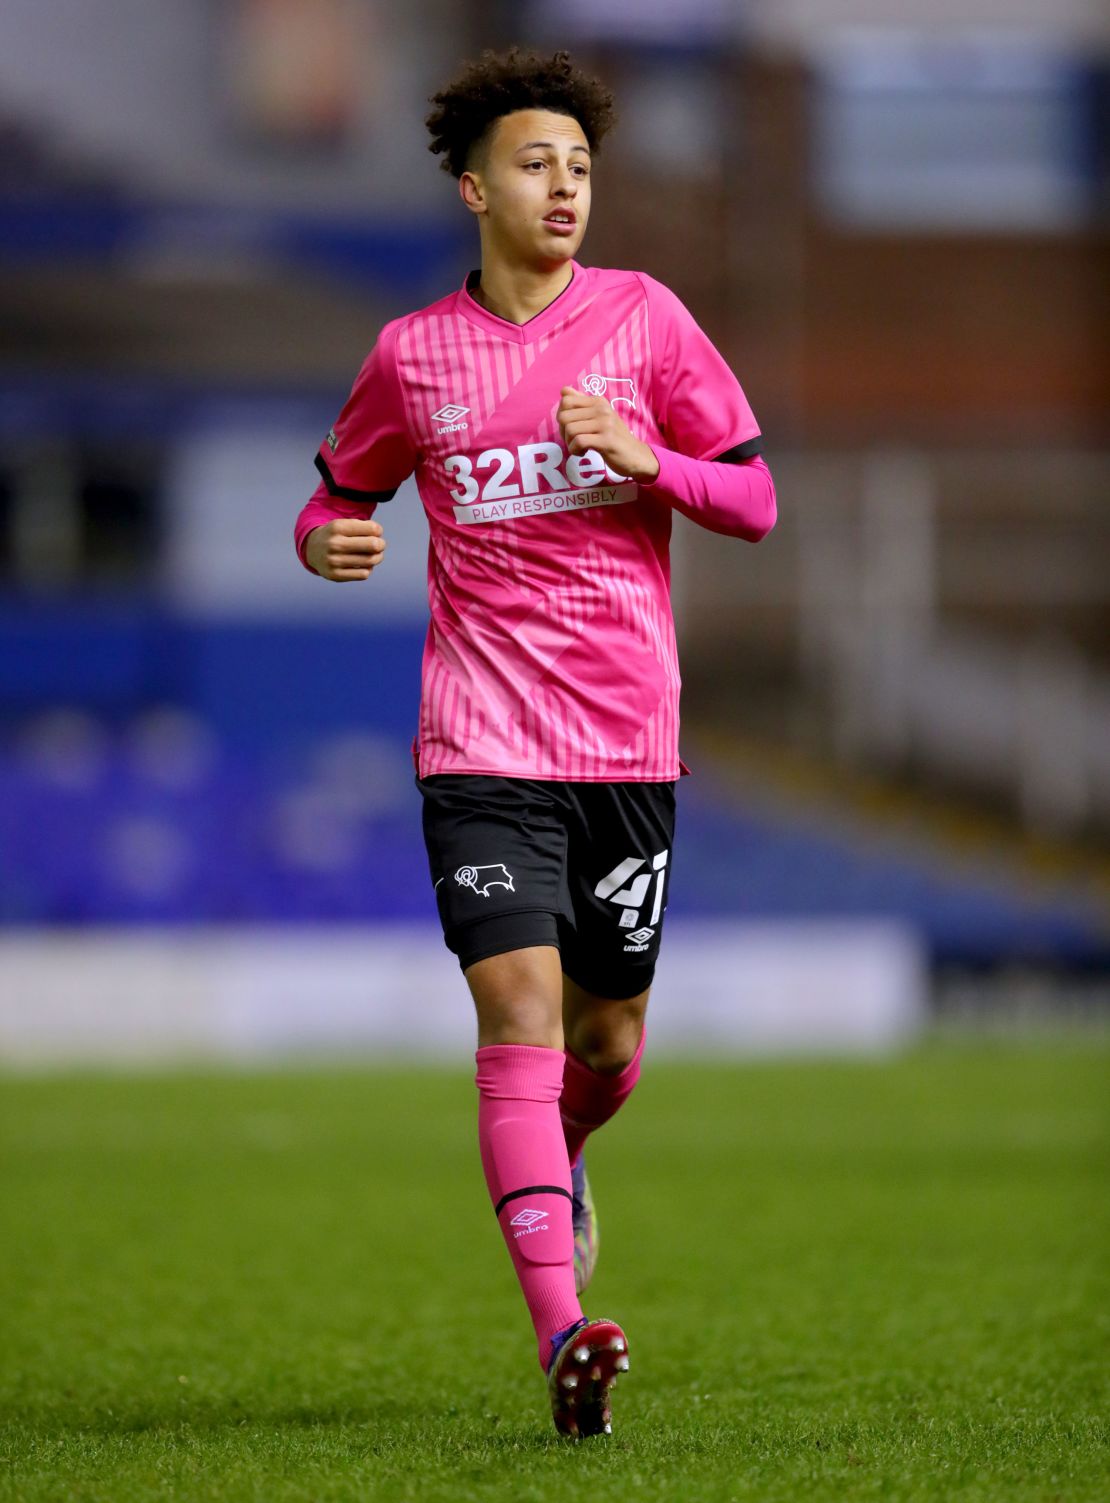 Gordon during a Sky Bet Championship match for Derby County against Birmingham.